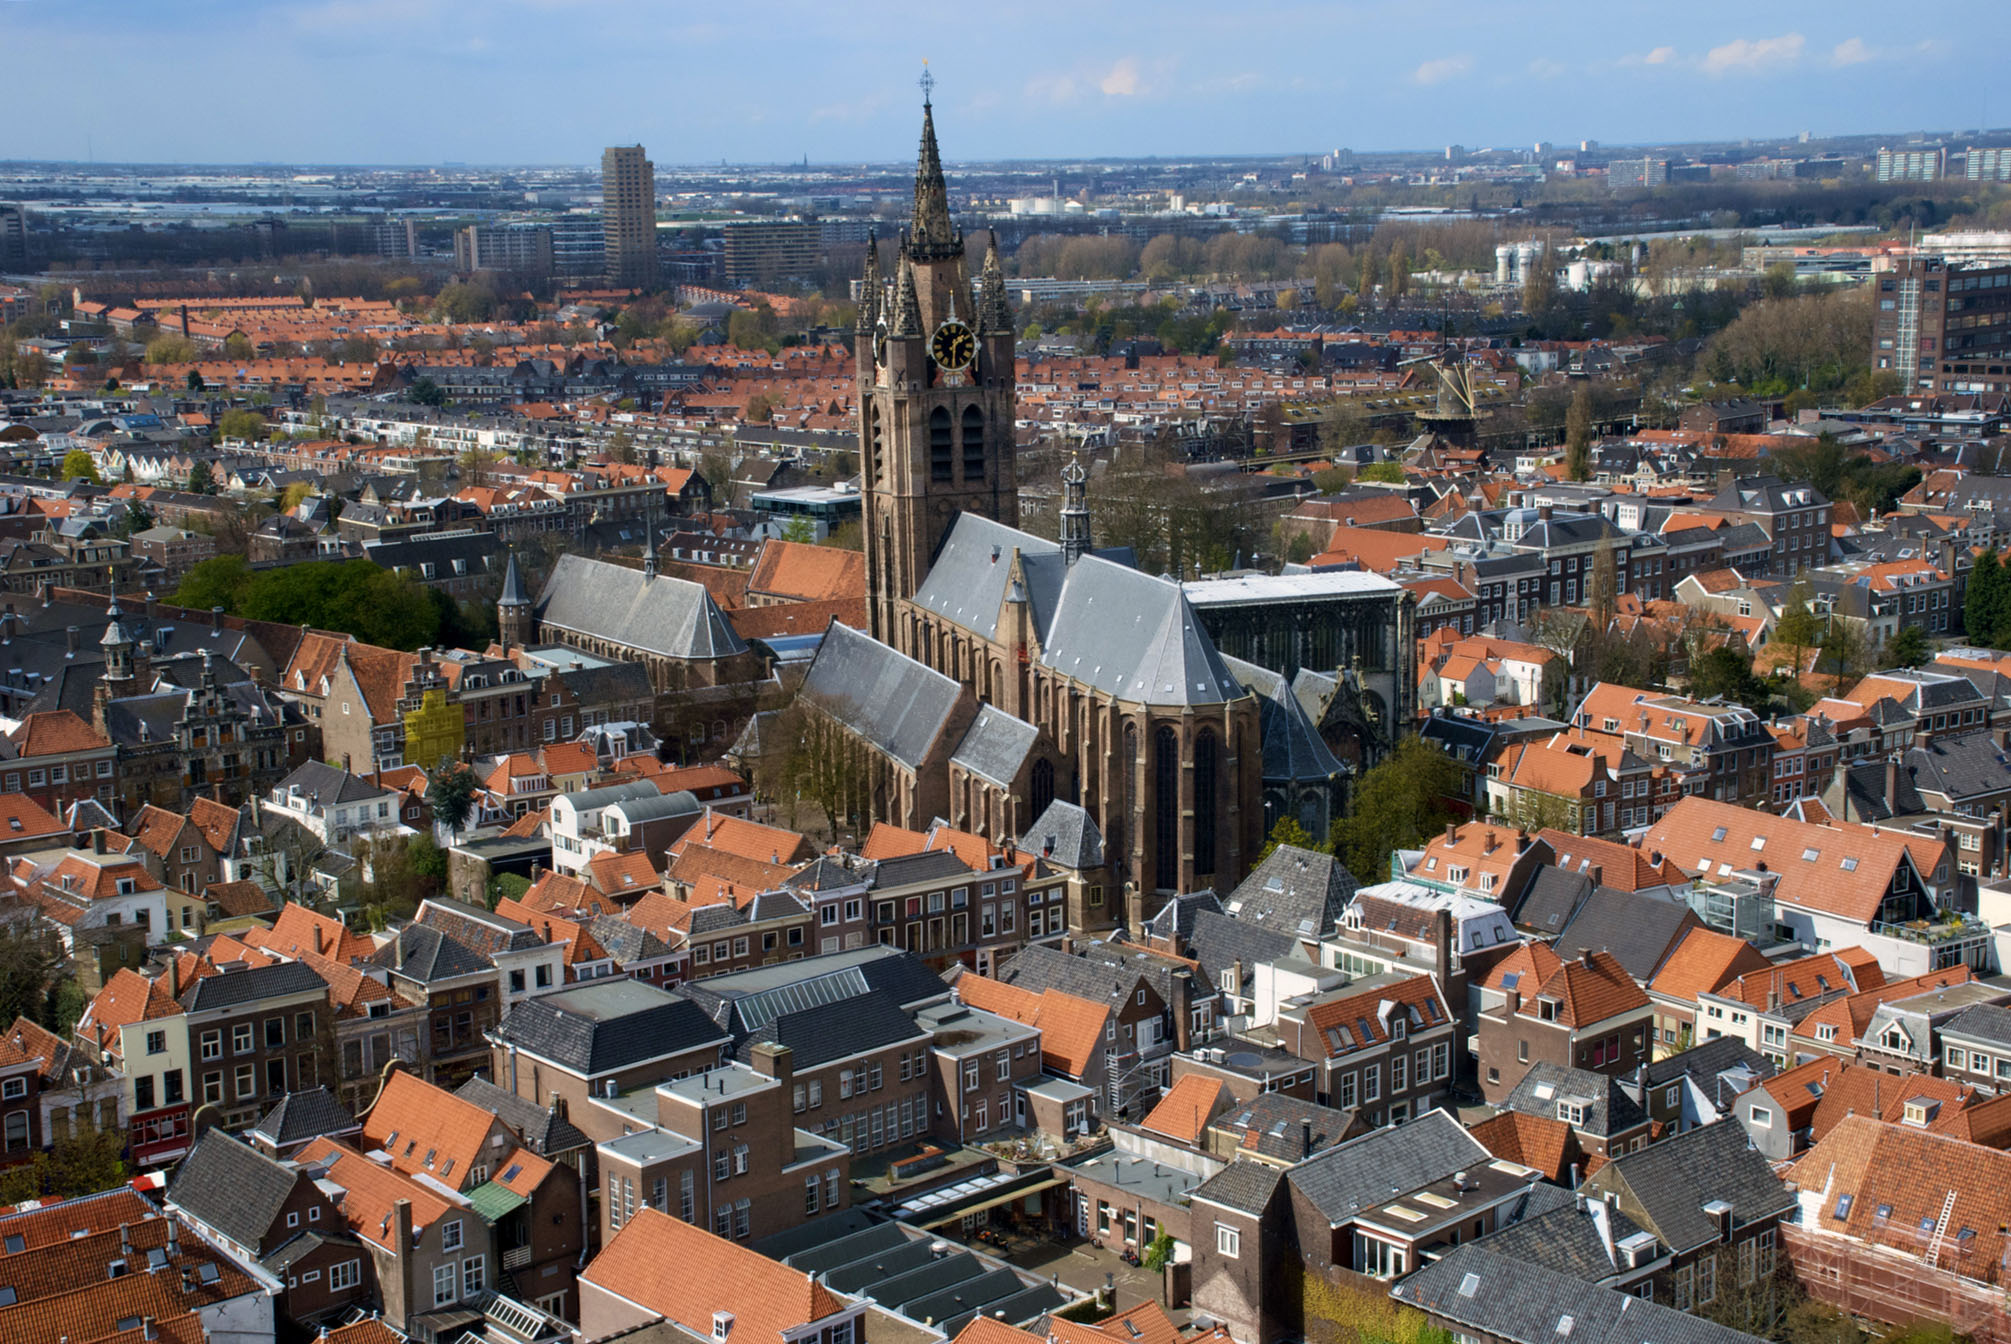 View from above on Delft